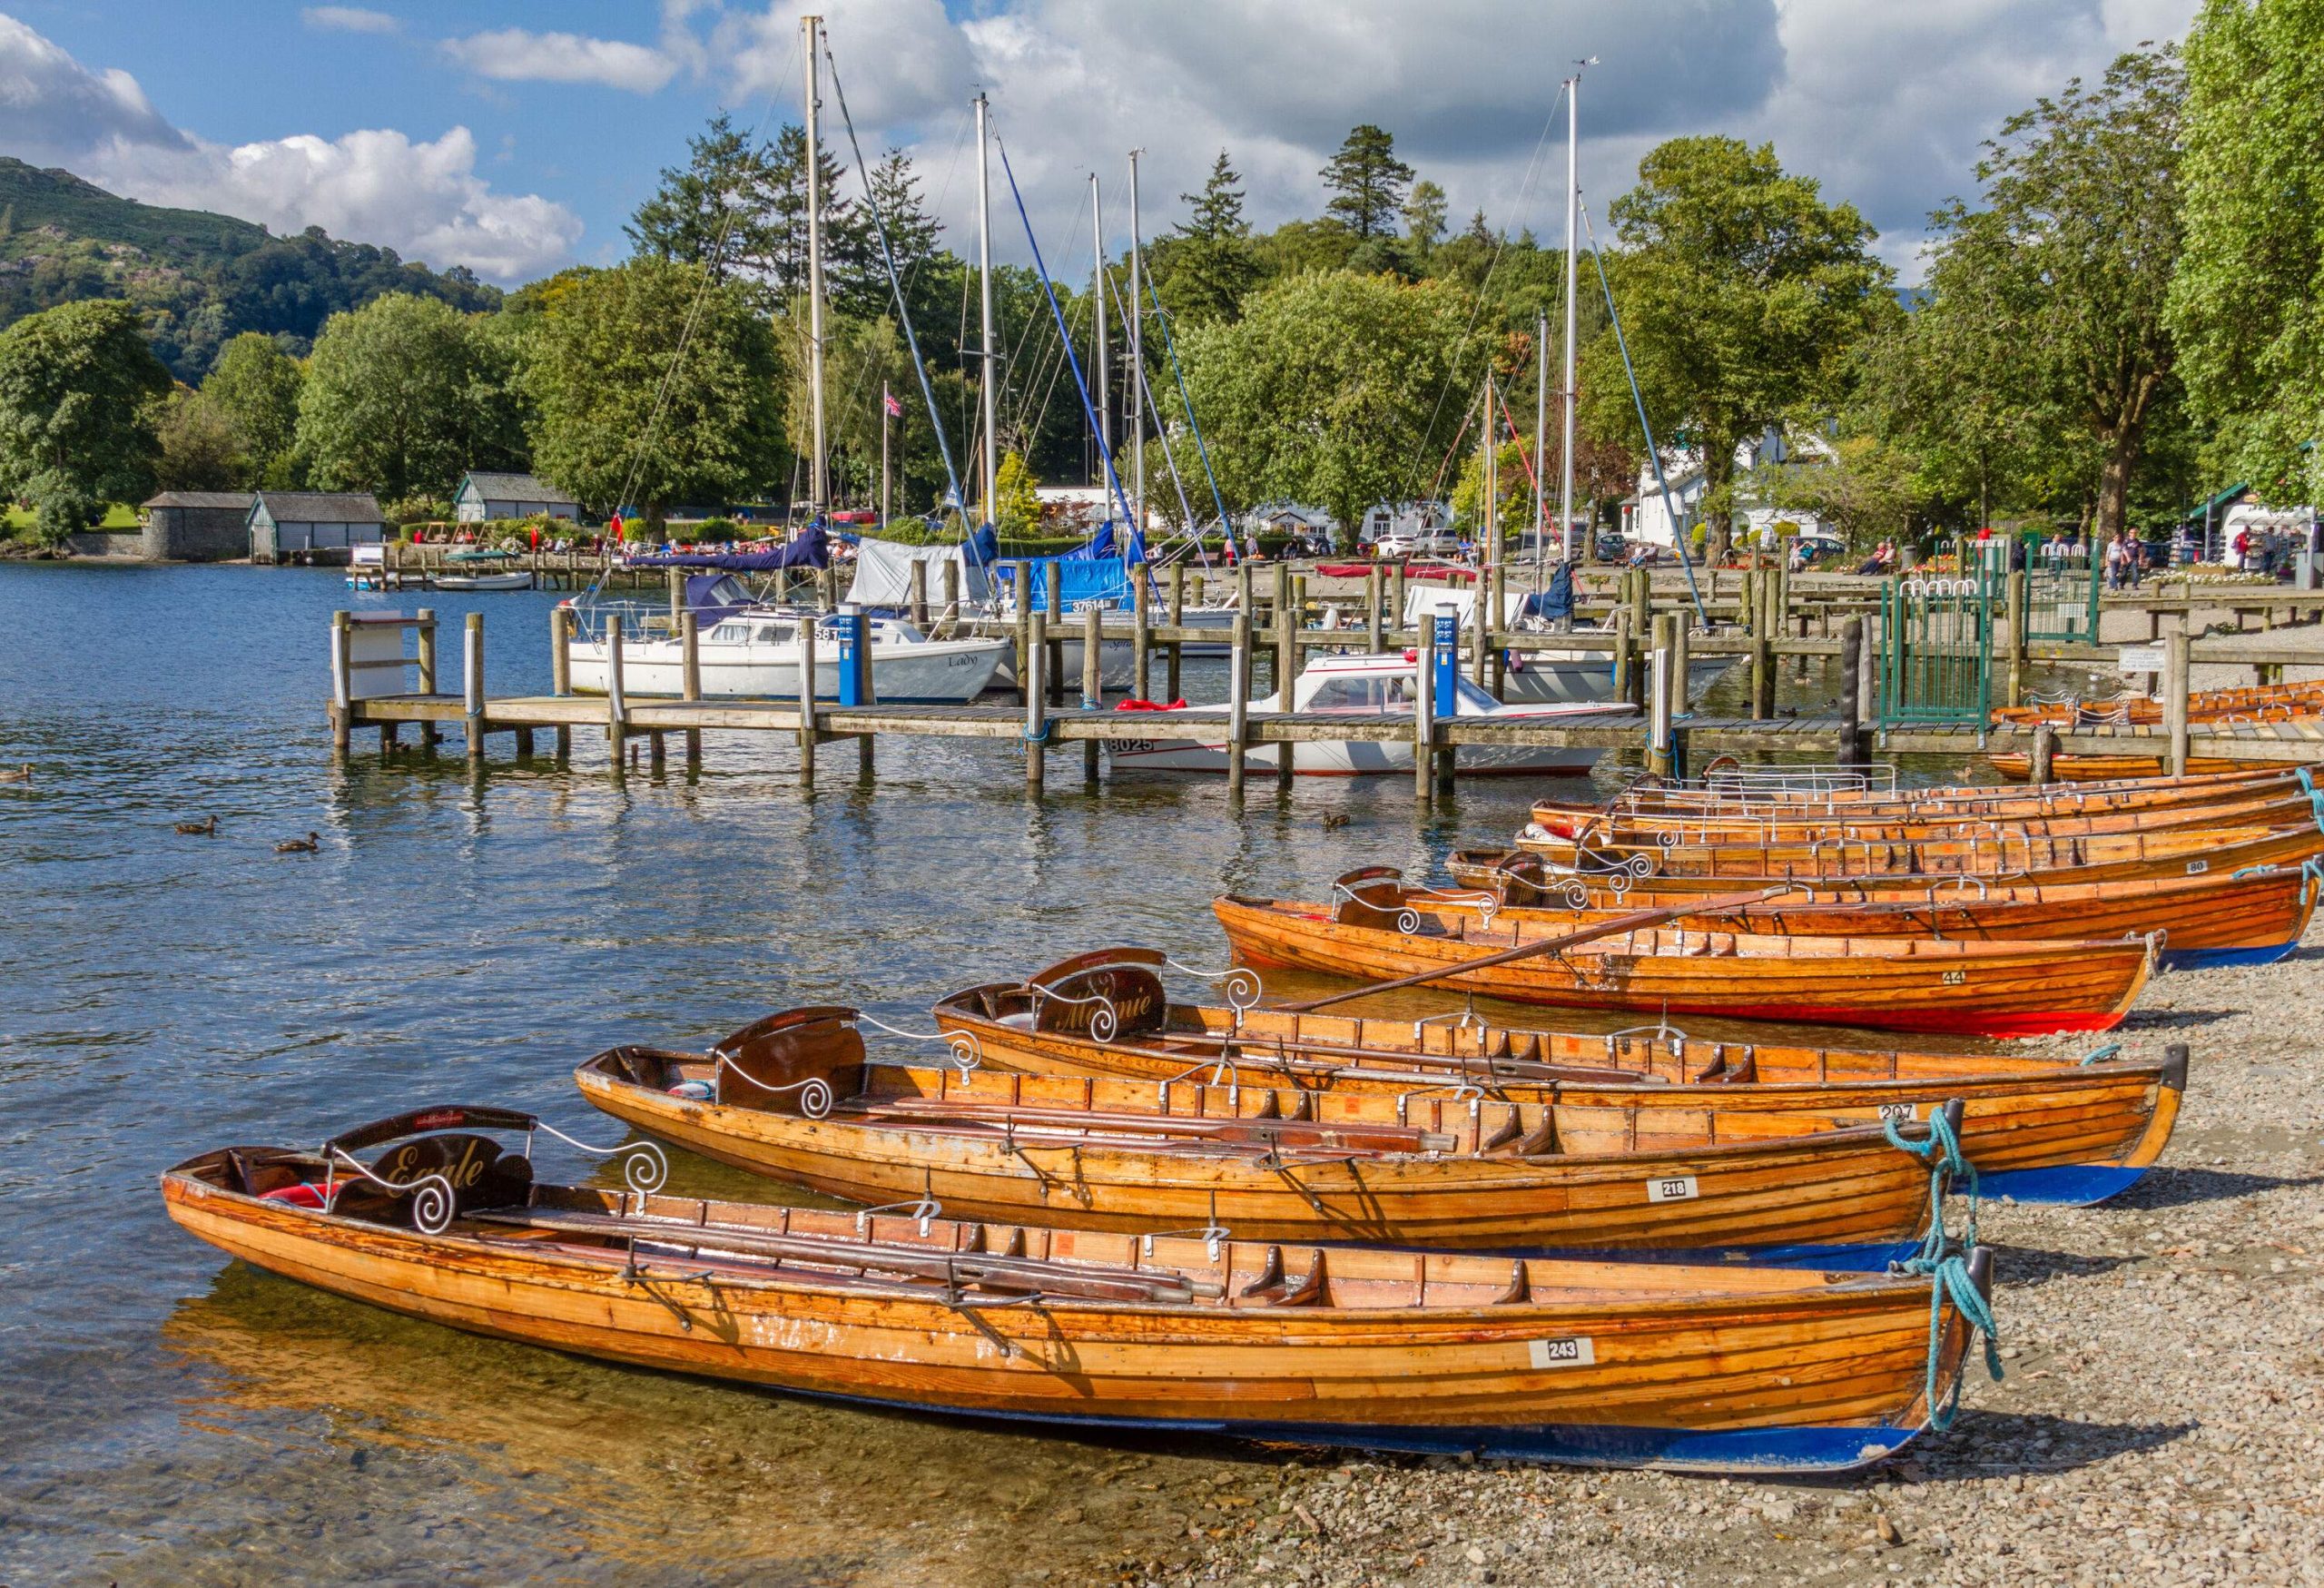 A line of orange rowing boats parked on a beach next to a pier with anchored sailboats.